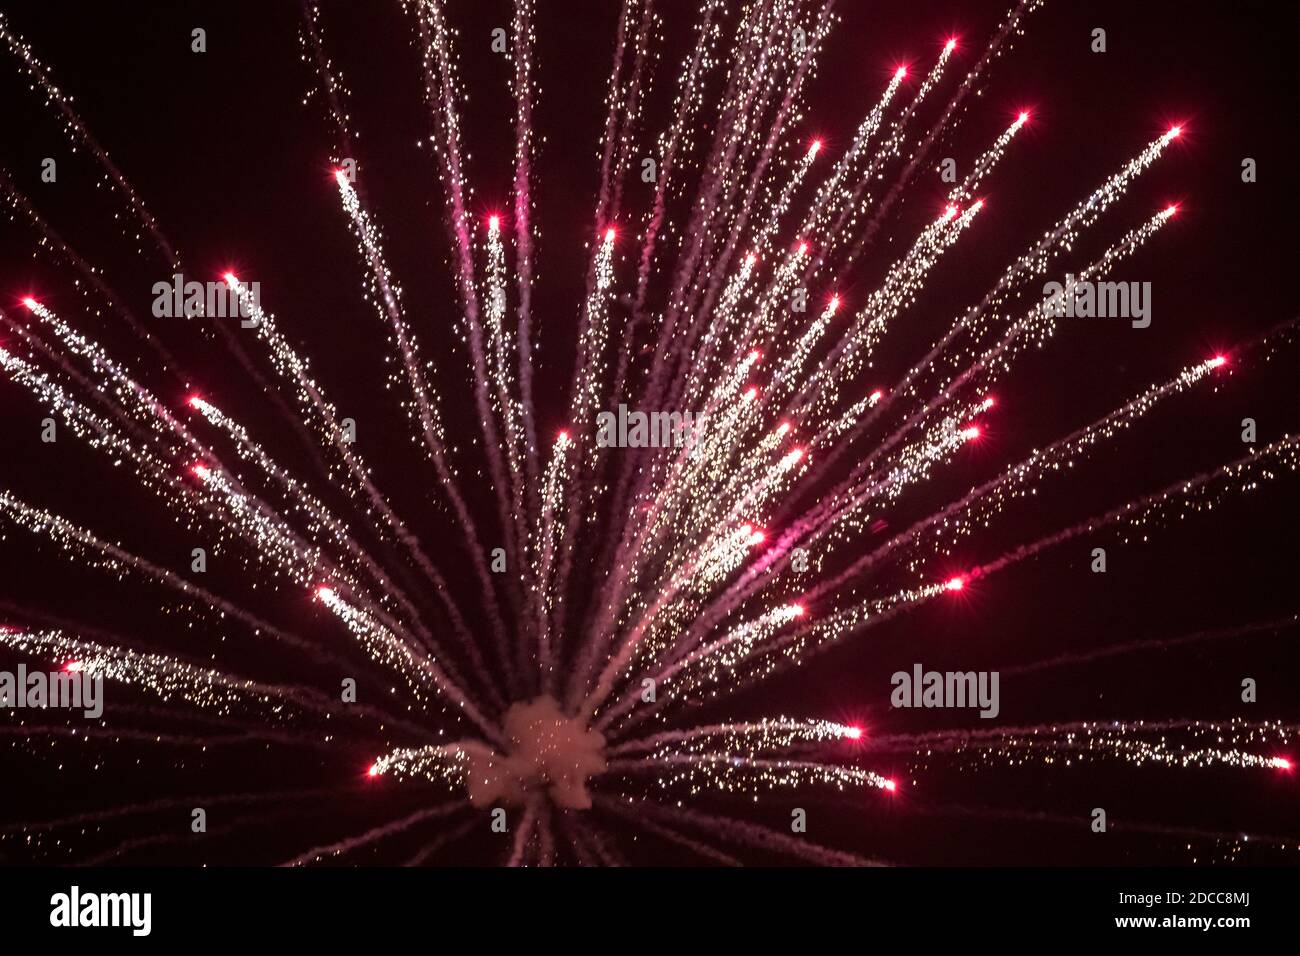 Burst of red and silver light as a pyrotechnic display firework explodes against the dark night sky in West Yorkshire U.K. Stock Photo